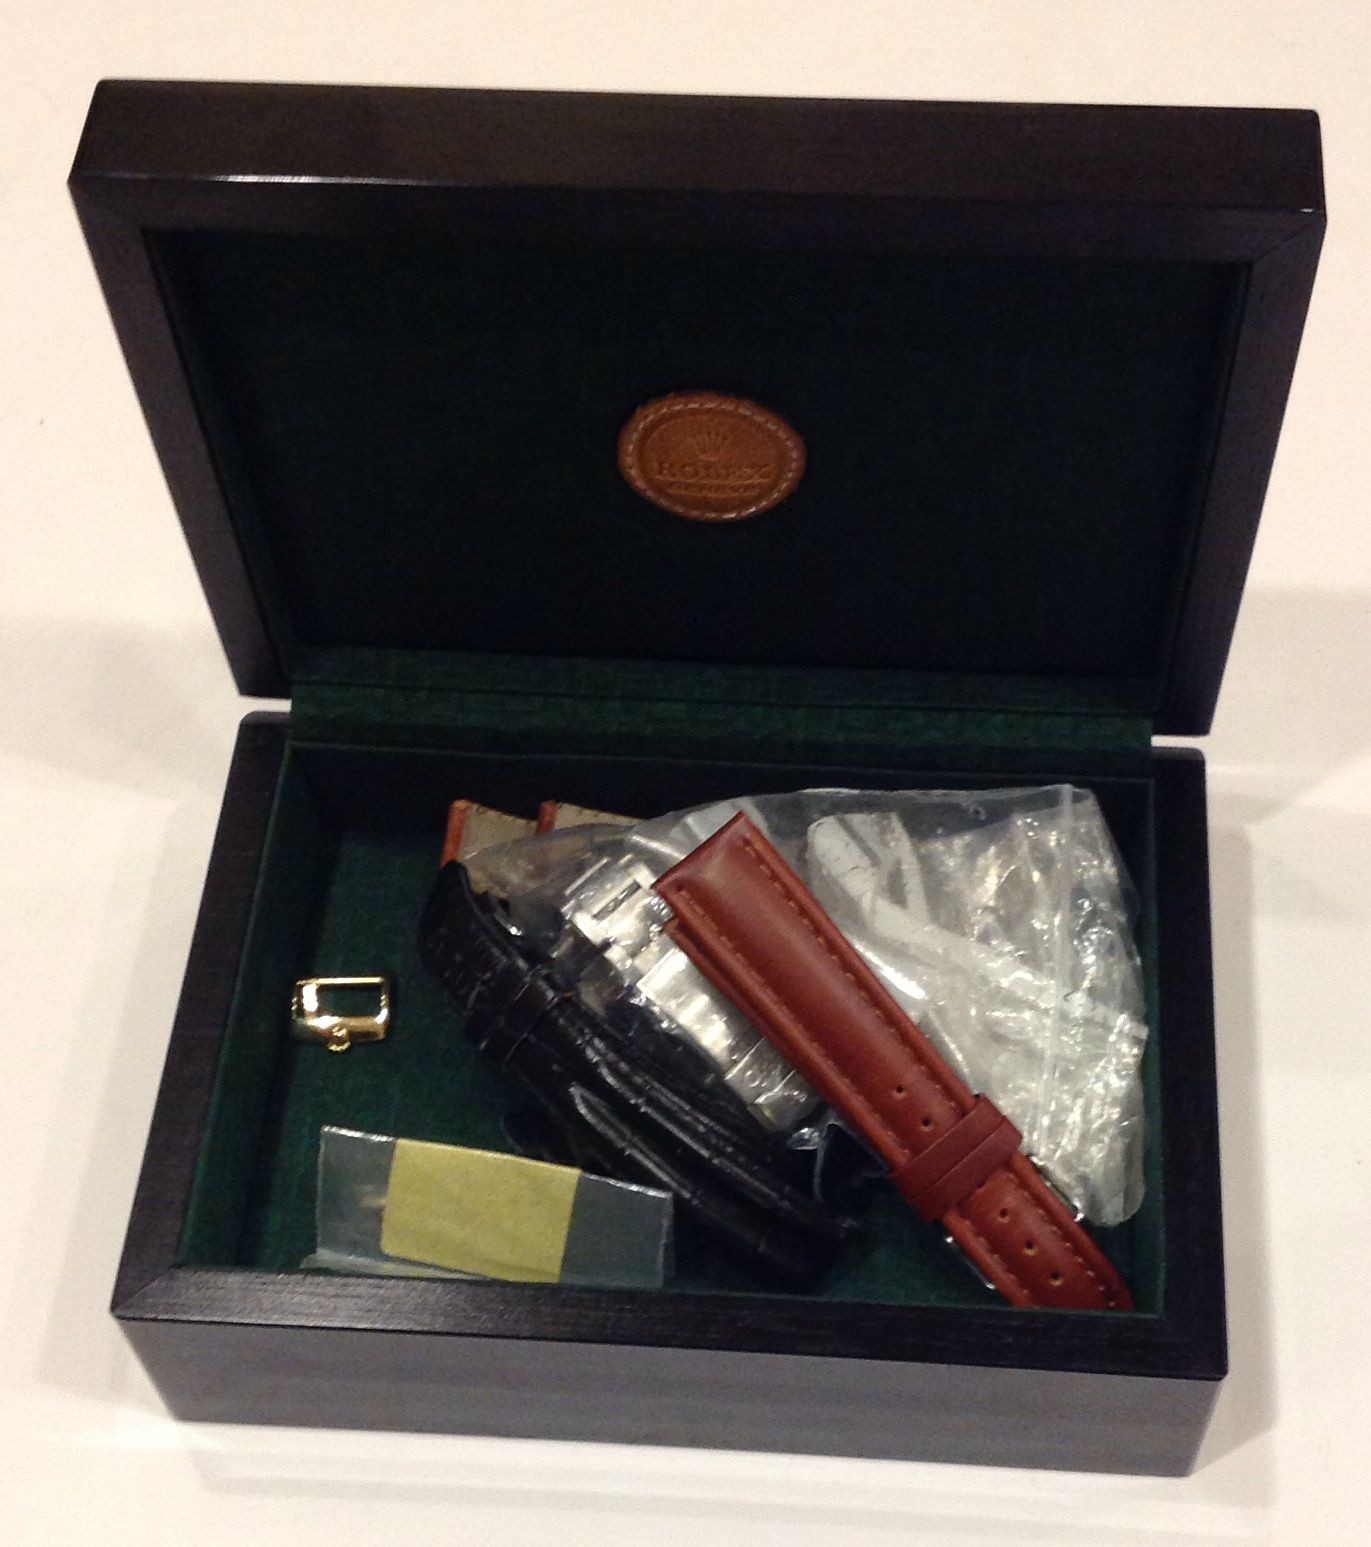 A ROLEX WATCH BOX Containing leather straps, links and a yellow metal Rolex strap buckle. - Image 2 of 2